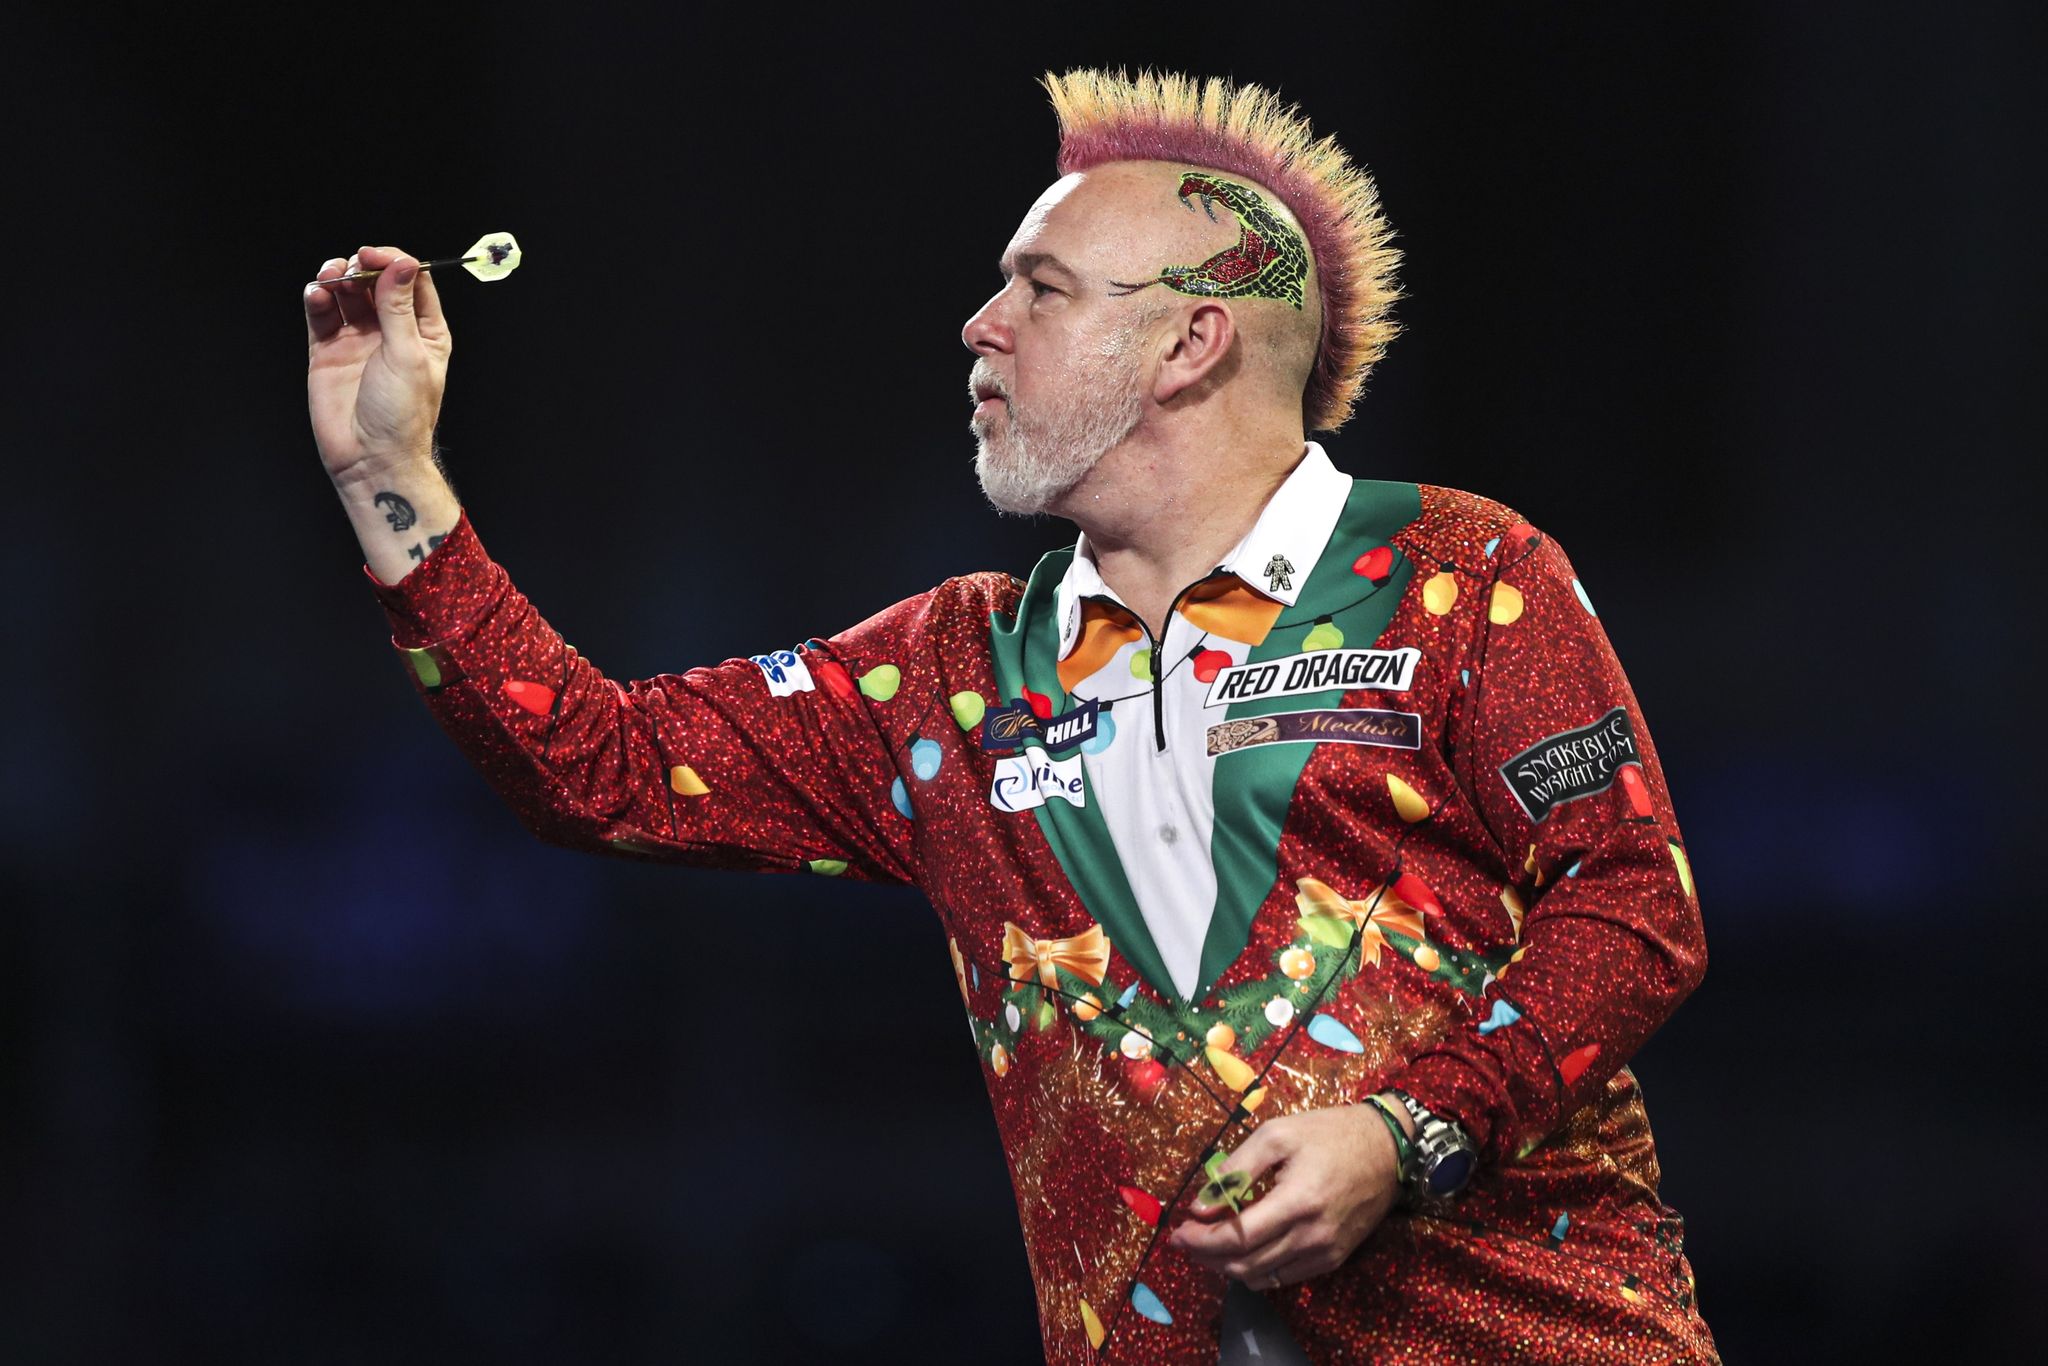 Darts-Star Peter Wright im Weihnachtsoutfit.